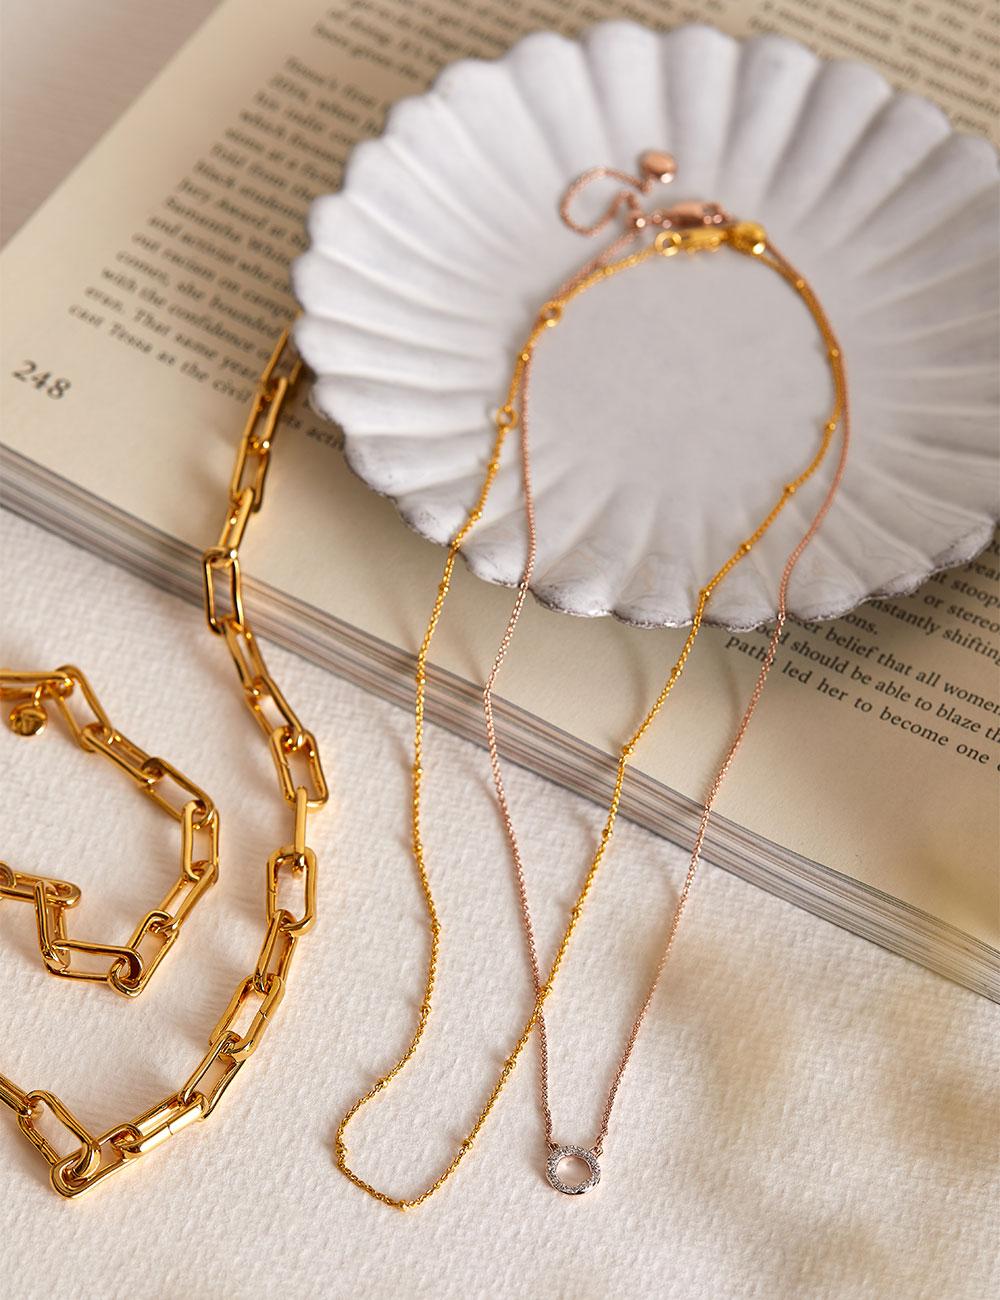 Gold Necklace Trend + How to Layer Gold Neckaces